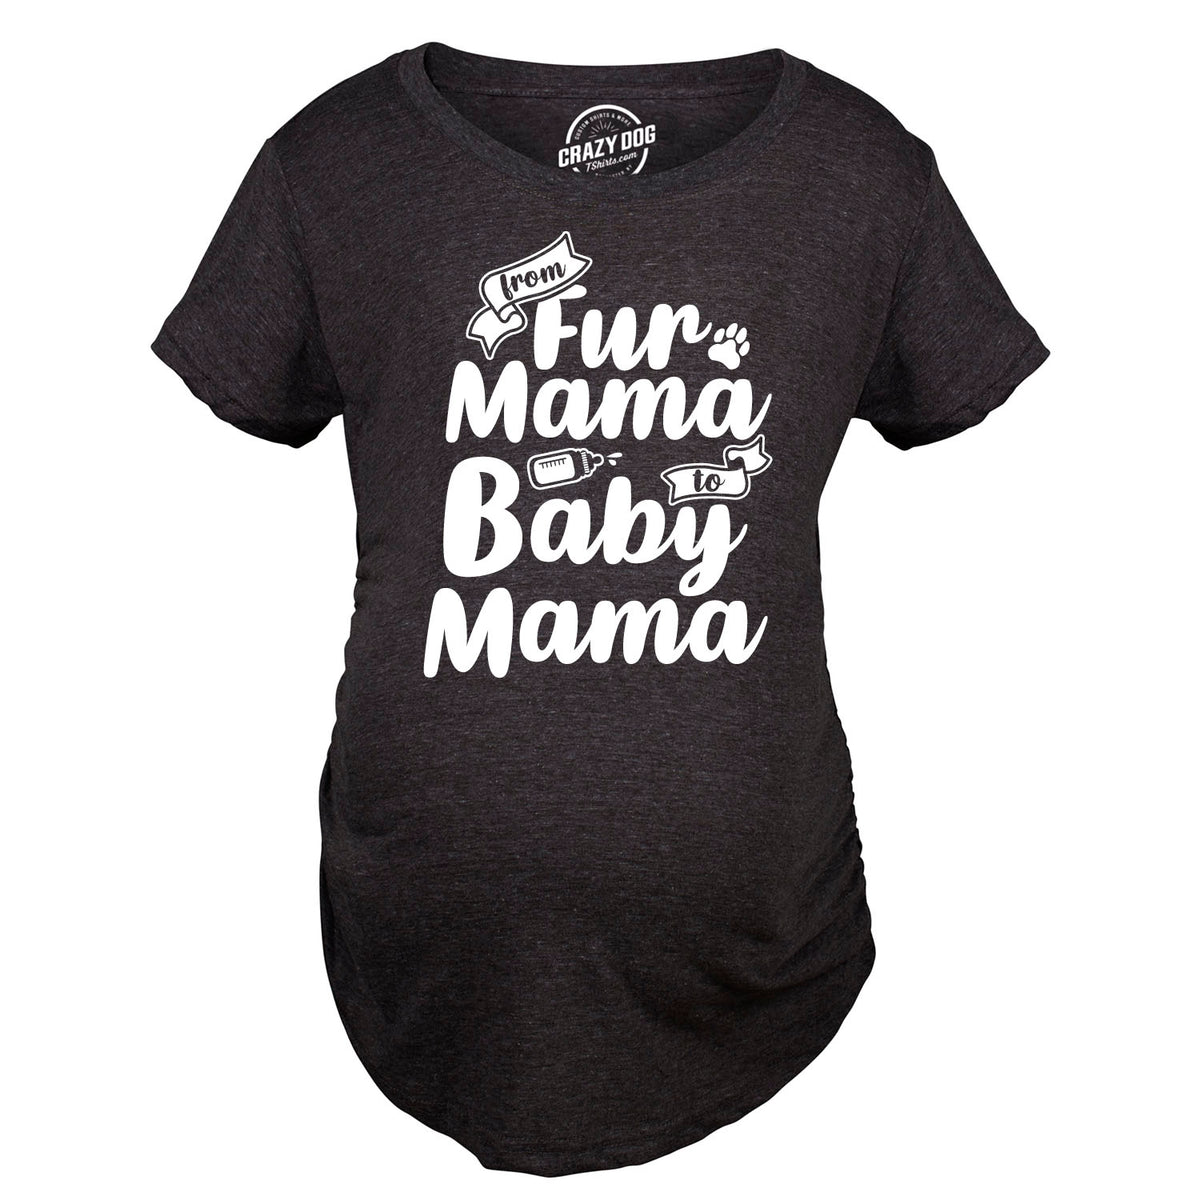 From Fur Mama To Baby Mama Maternity T Shirt